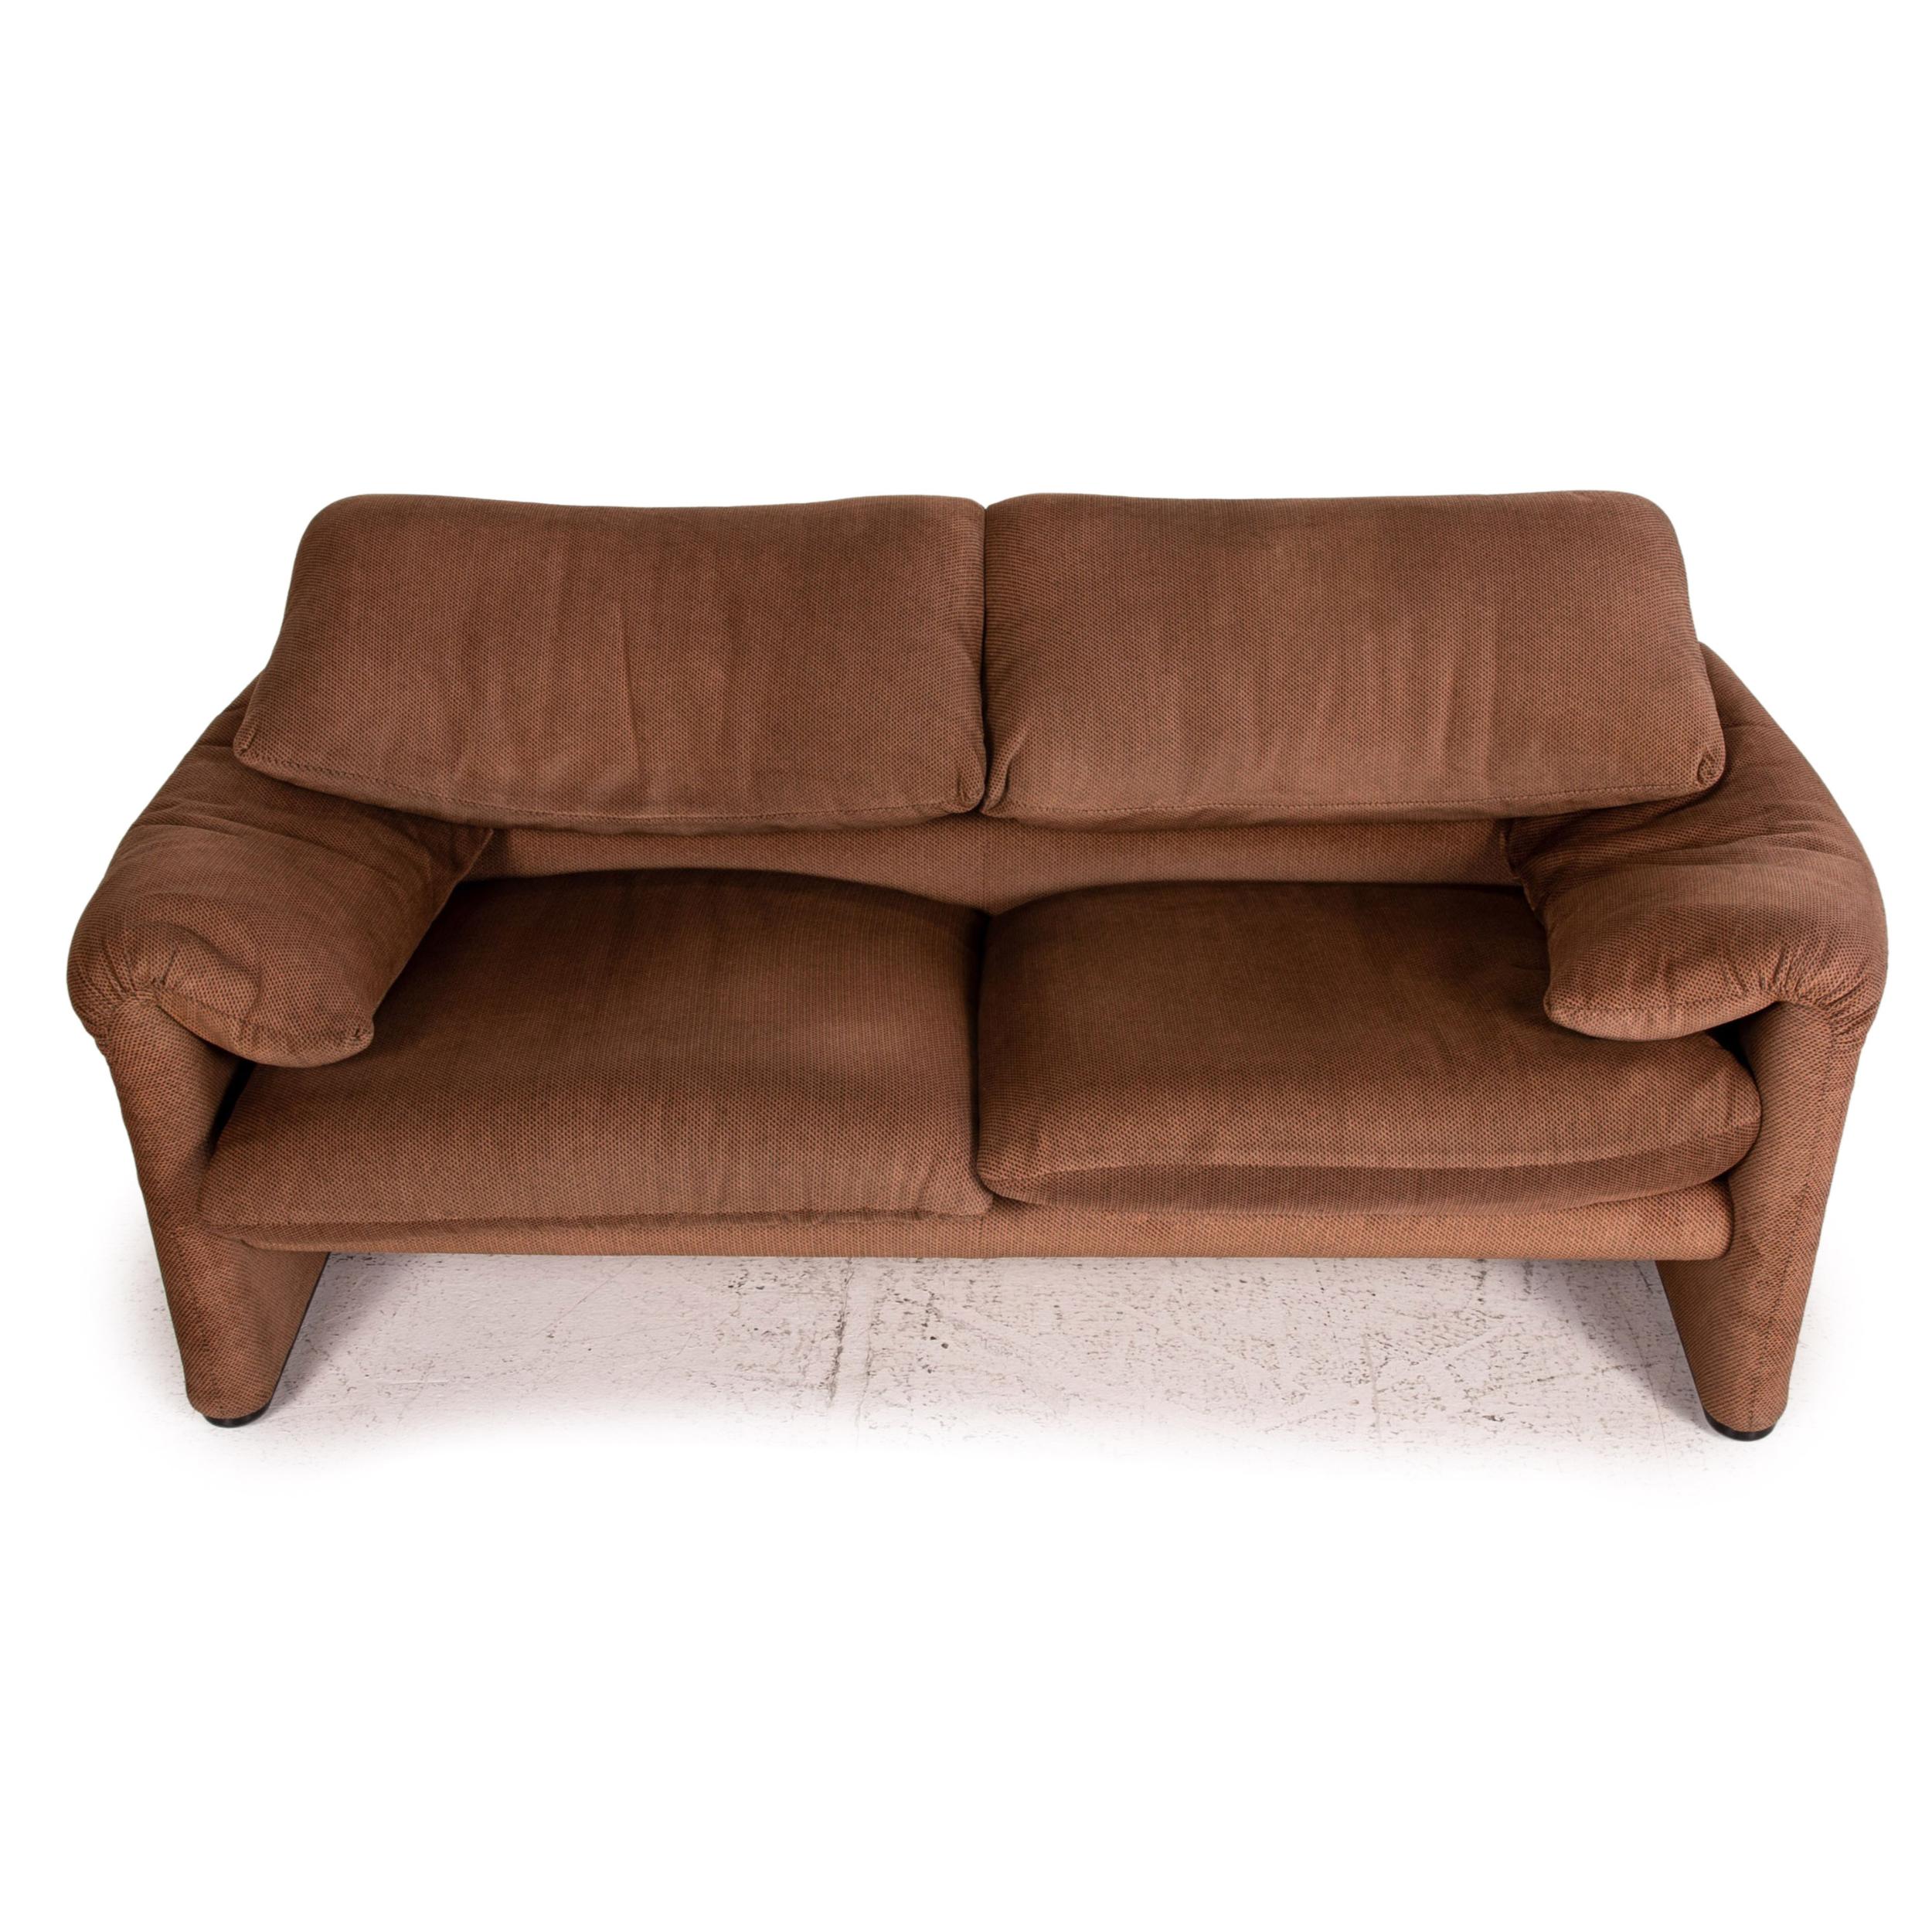 Cassina Maralunga Fabric Sofa Brown Two-Seater Function Couch 2